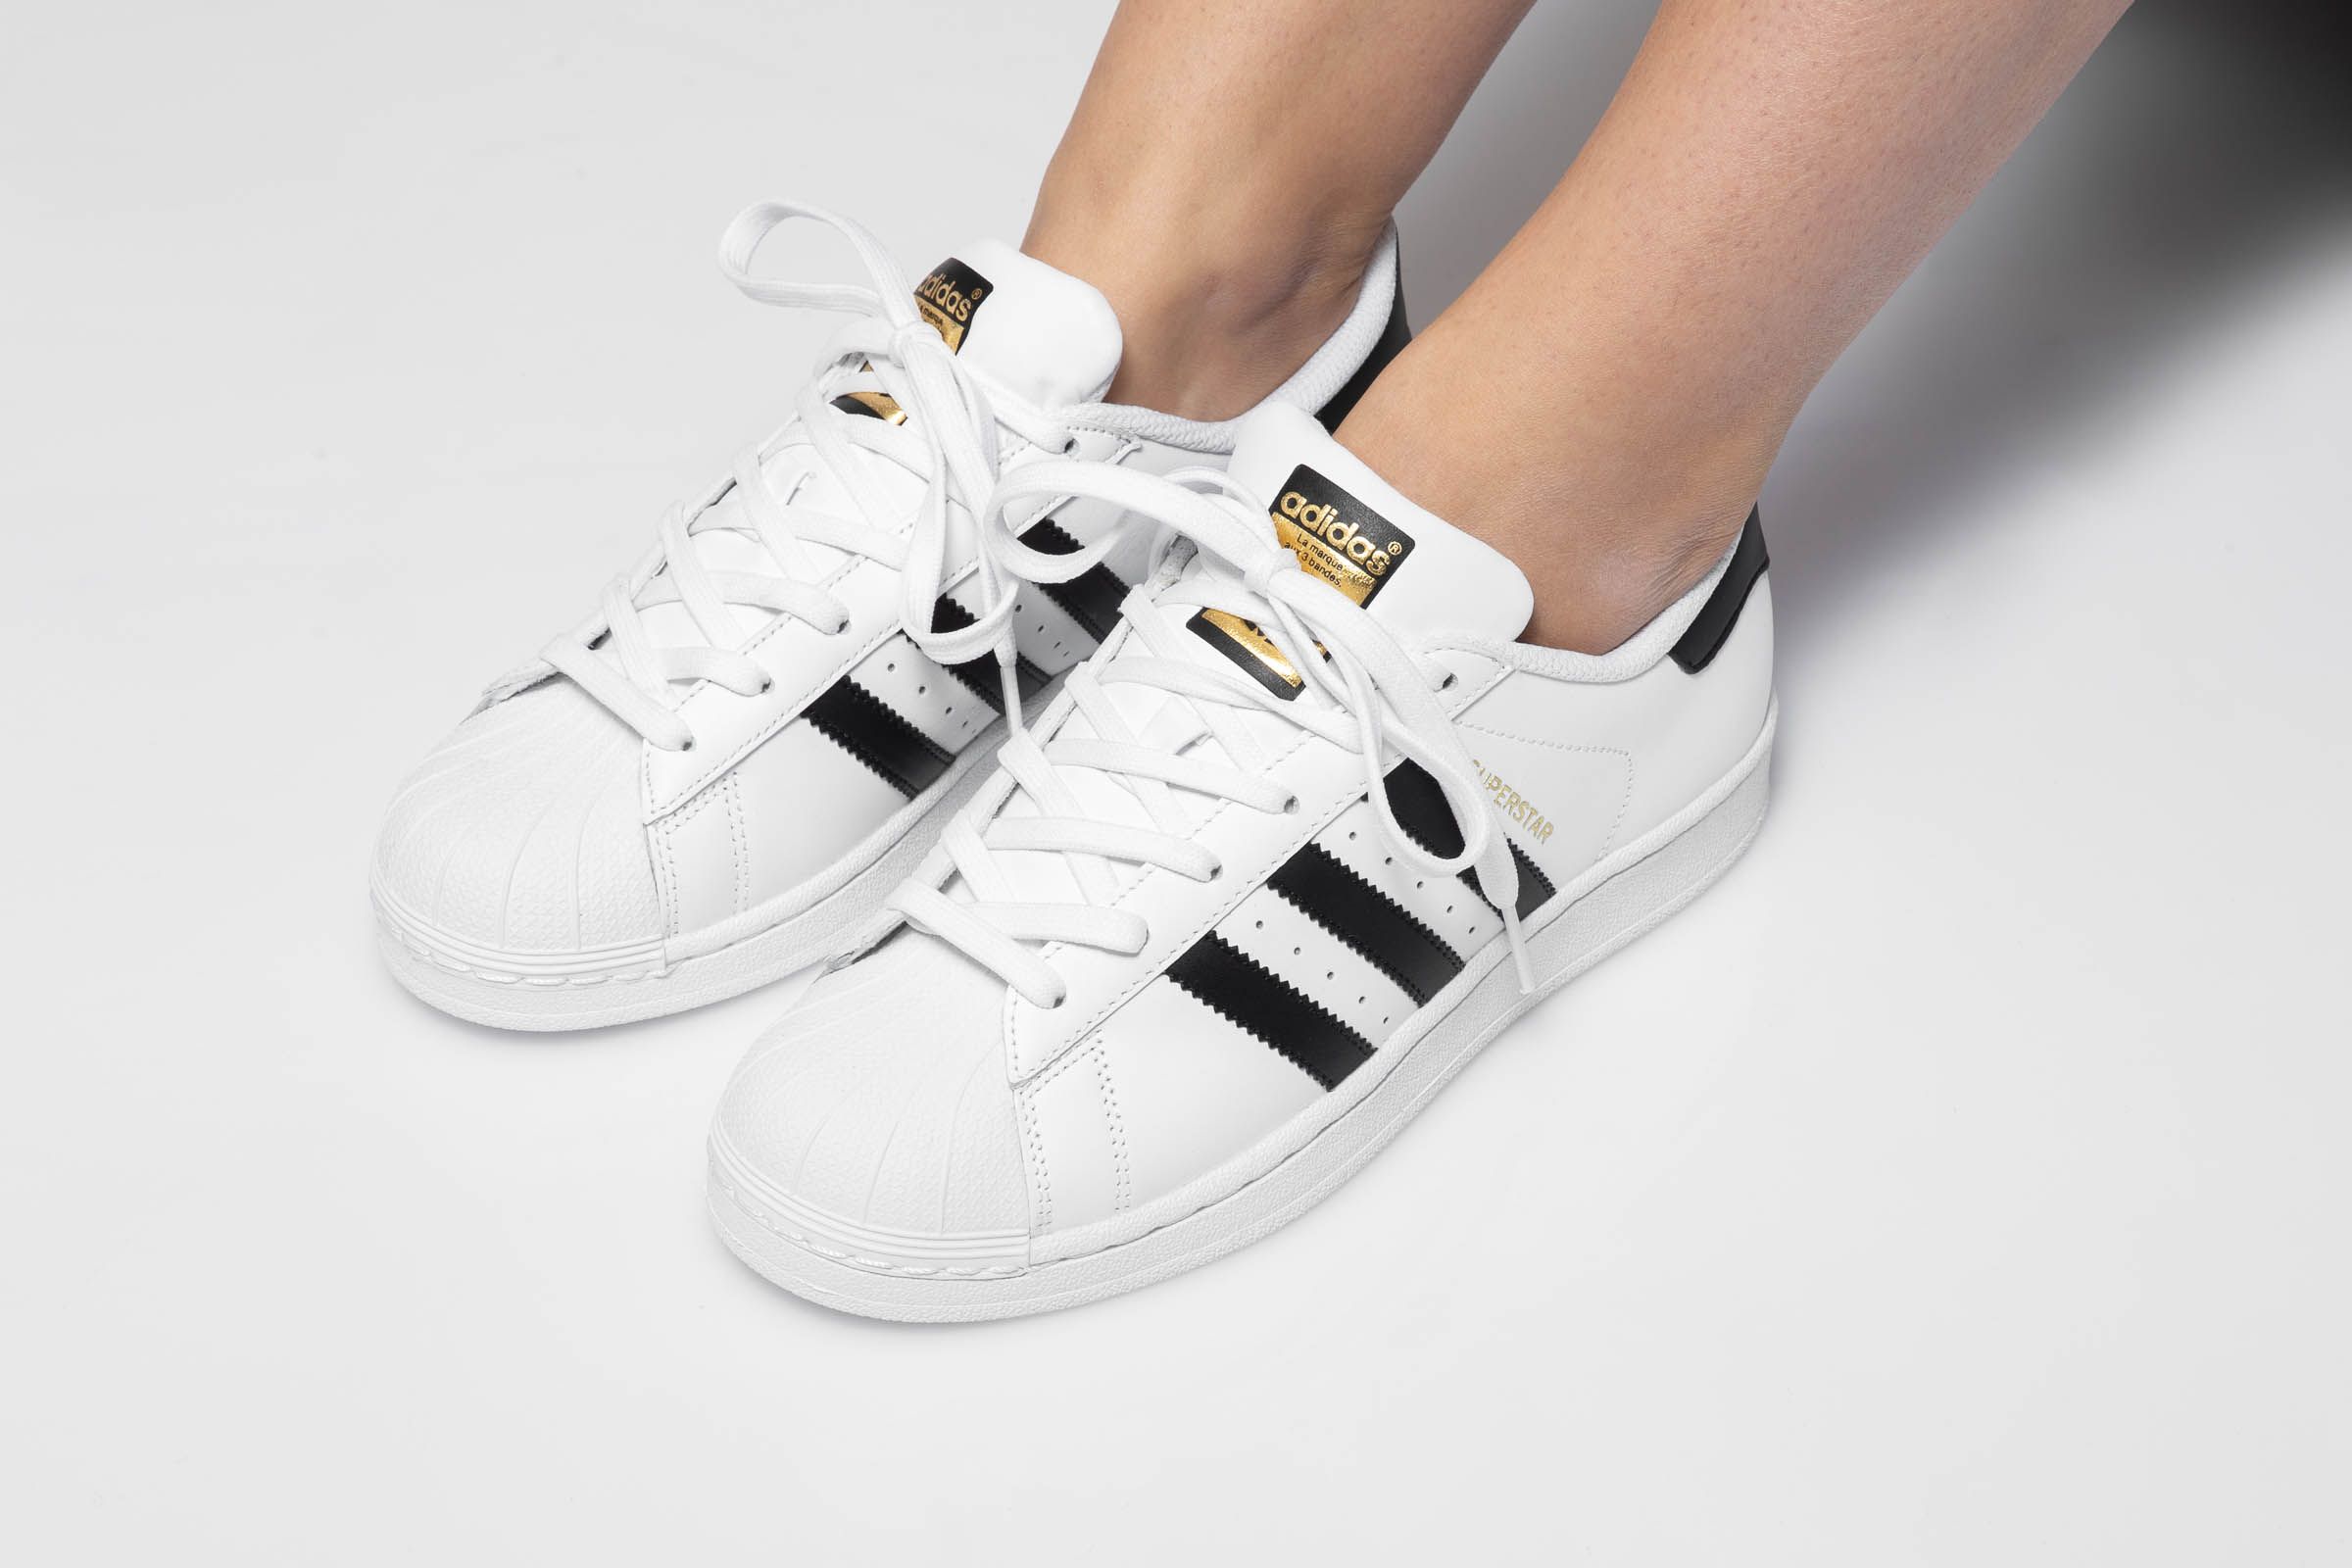 Evaporar excepto por Subir y bajar Titolo on Twitter: "the all-time classic Adidas Superstar is back in stock.  Available in mens and wins sizes online. here ➡️ https://t.co/bFWL38xJ3U UK  3.5 (36) - UK 11 (46) style code 🔎